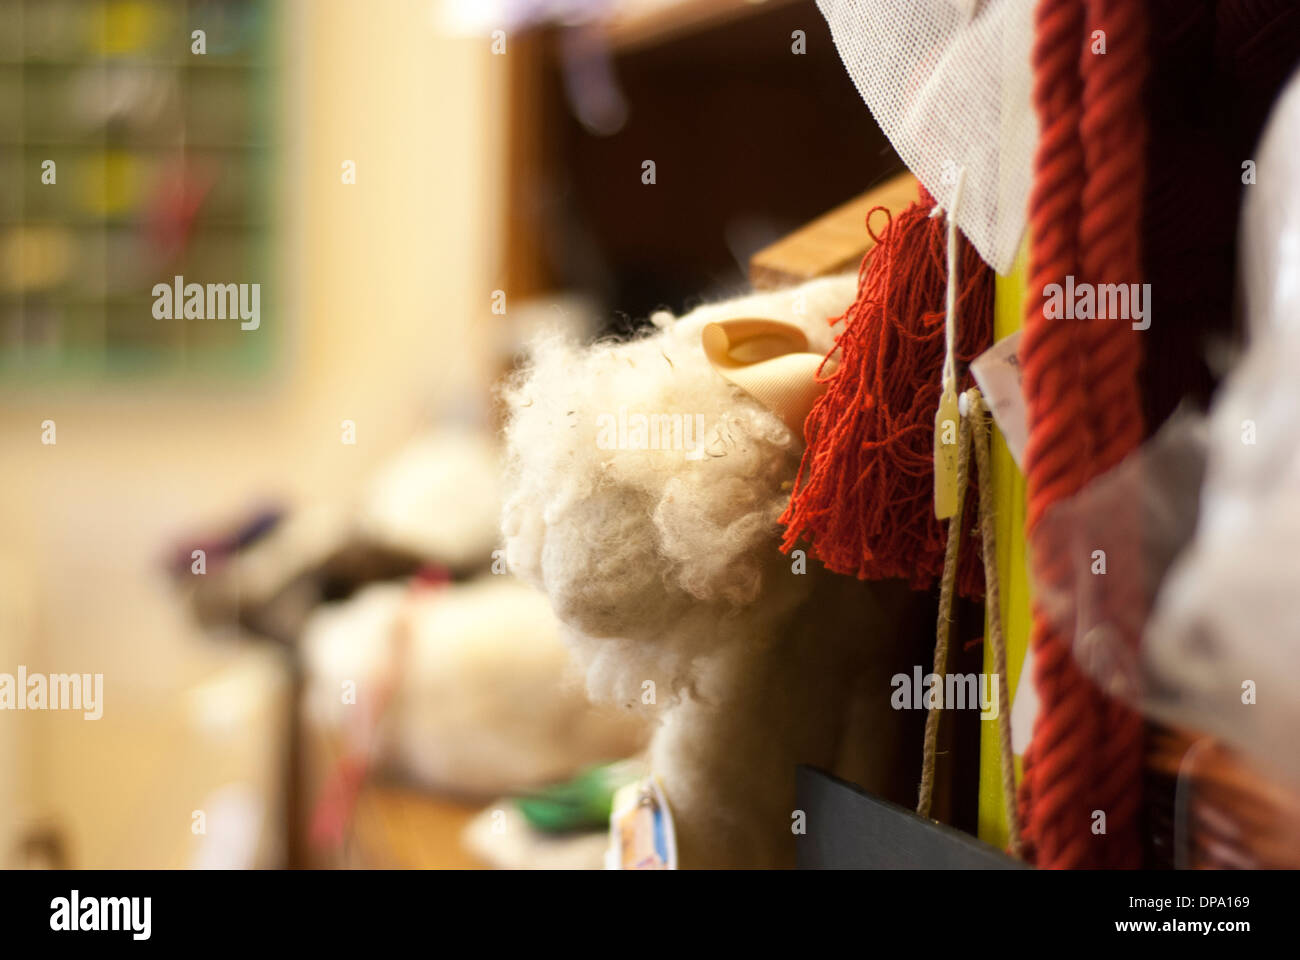 A clutter of multi coloured haberdashery, threads, yarns and wool with room for text Stock Photo